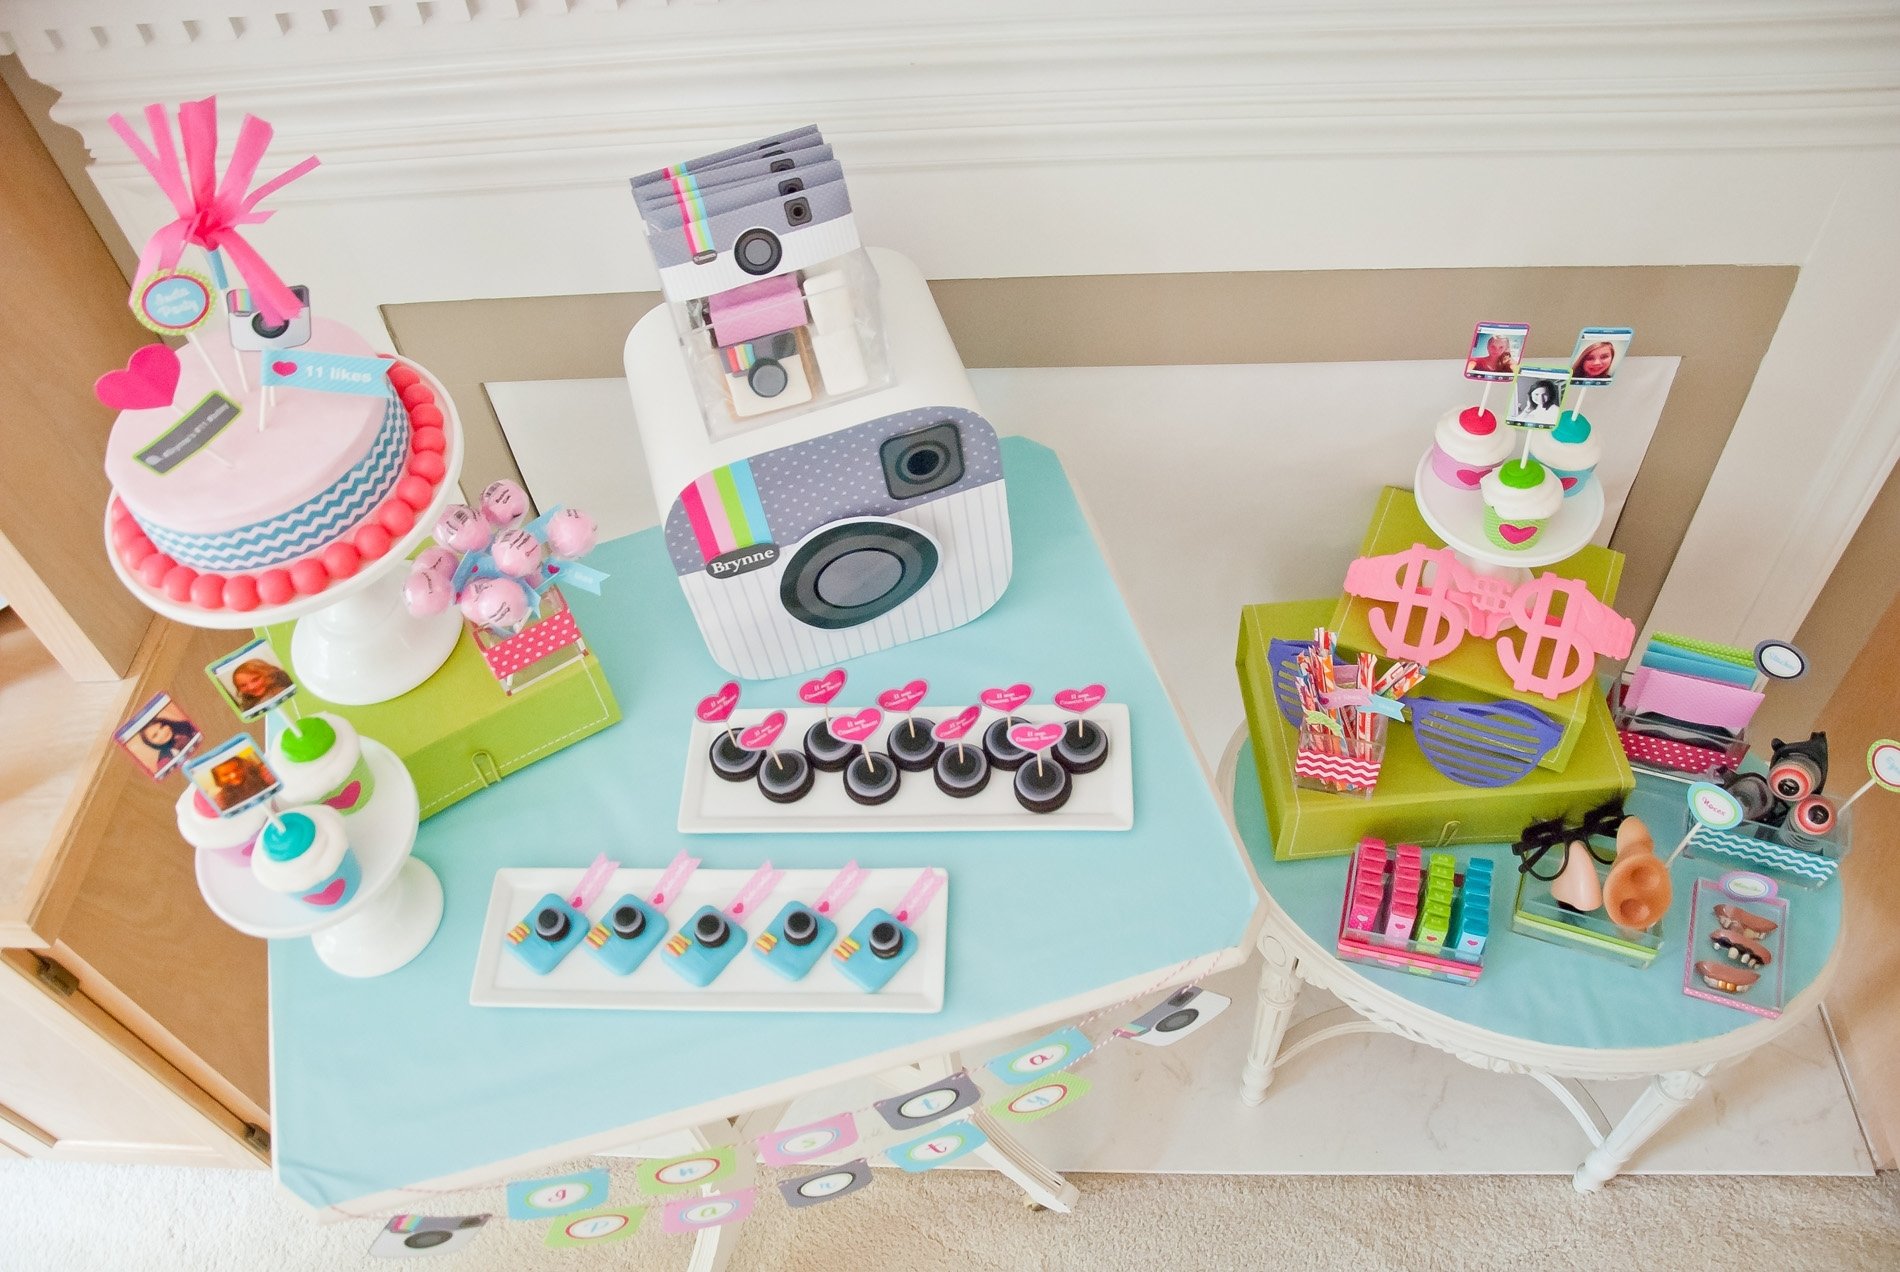 10 Unique Ideas For A Birthday Party tween teen insta party instragram birthday party anders ruff 3 2022